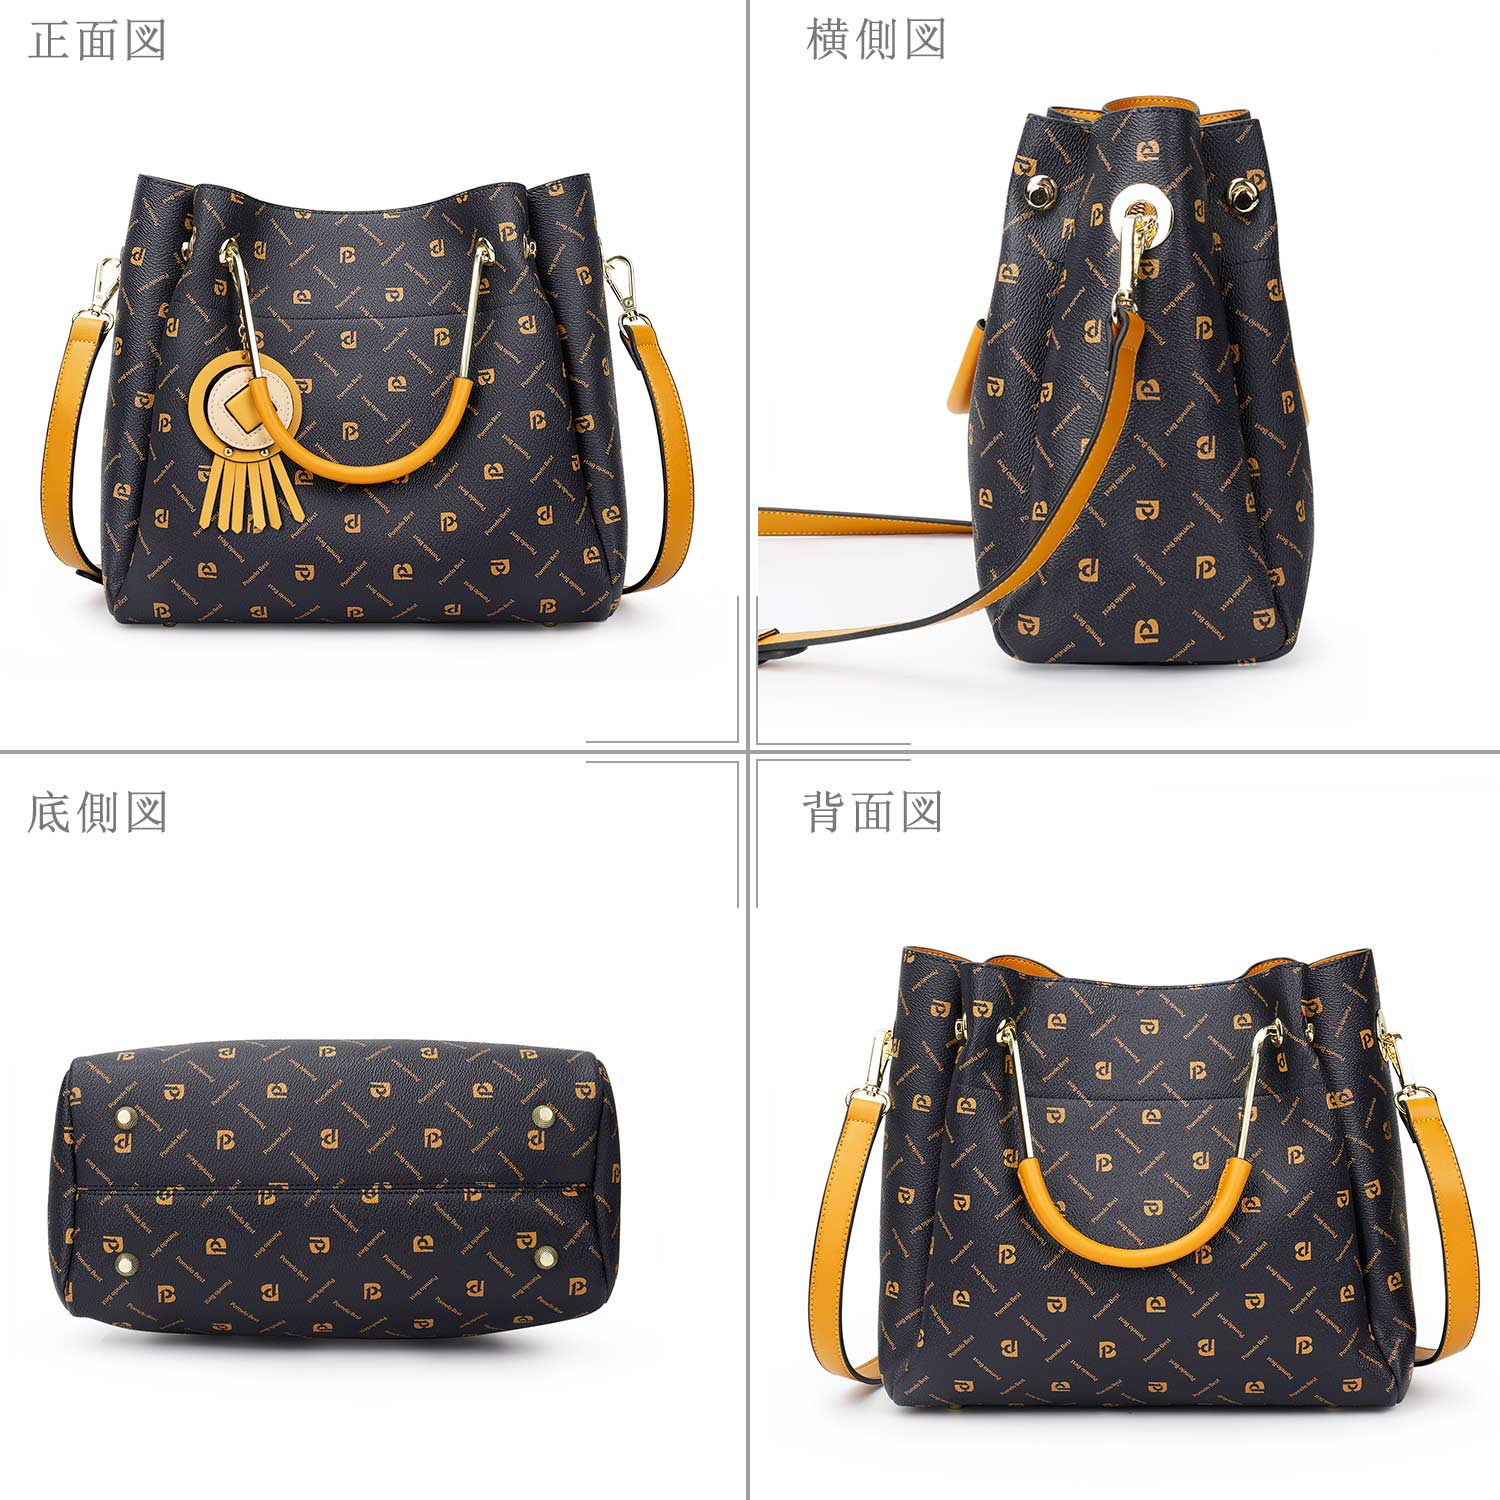 Designer Bucket Bag with Matching Wallet Simple and Elegant Looking